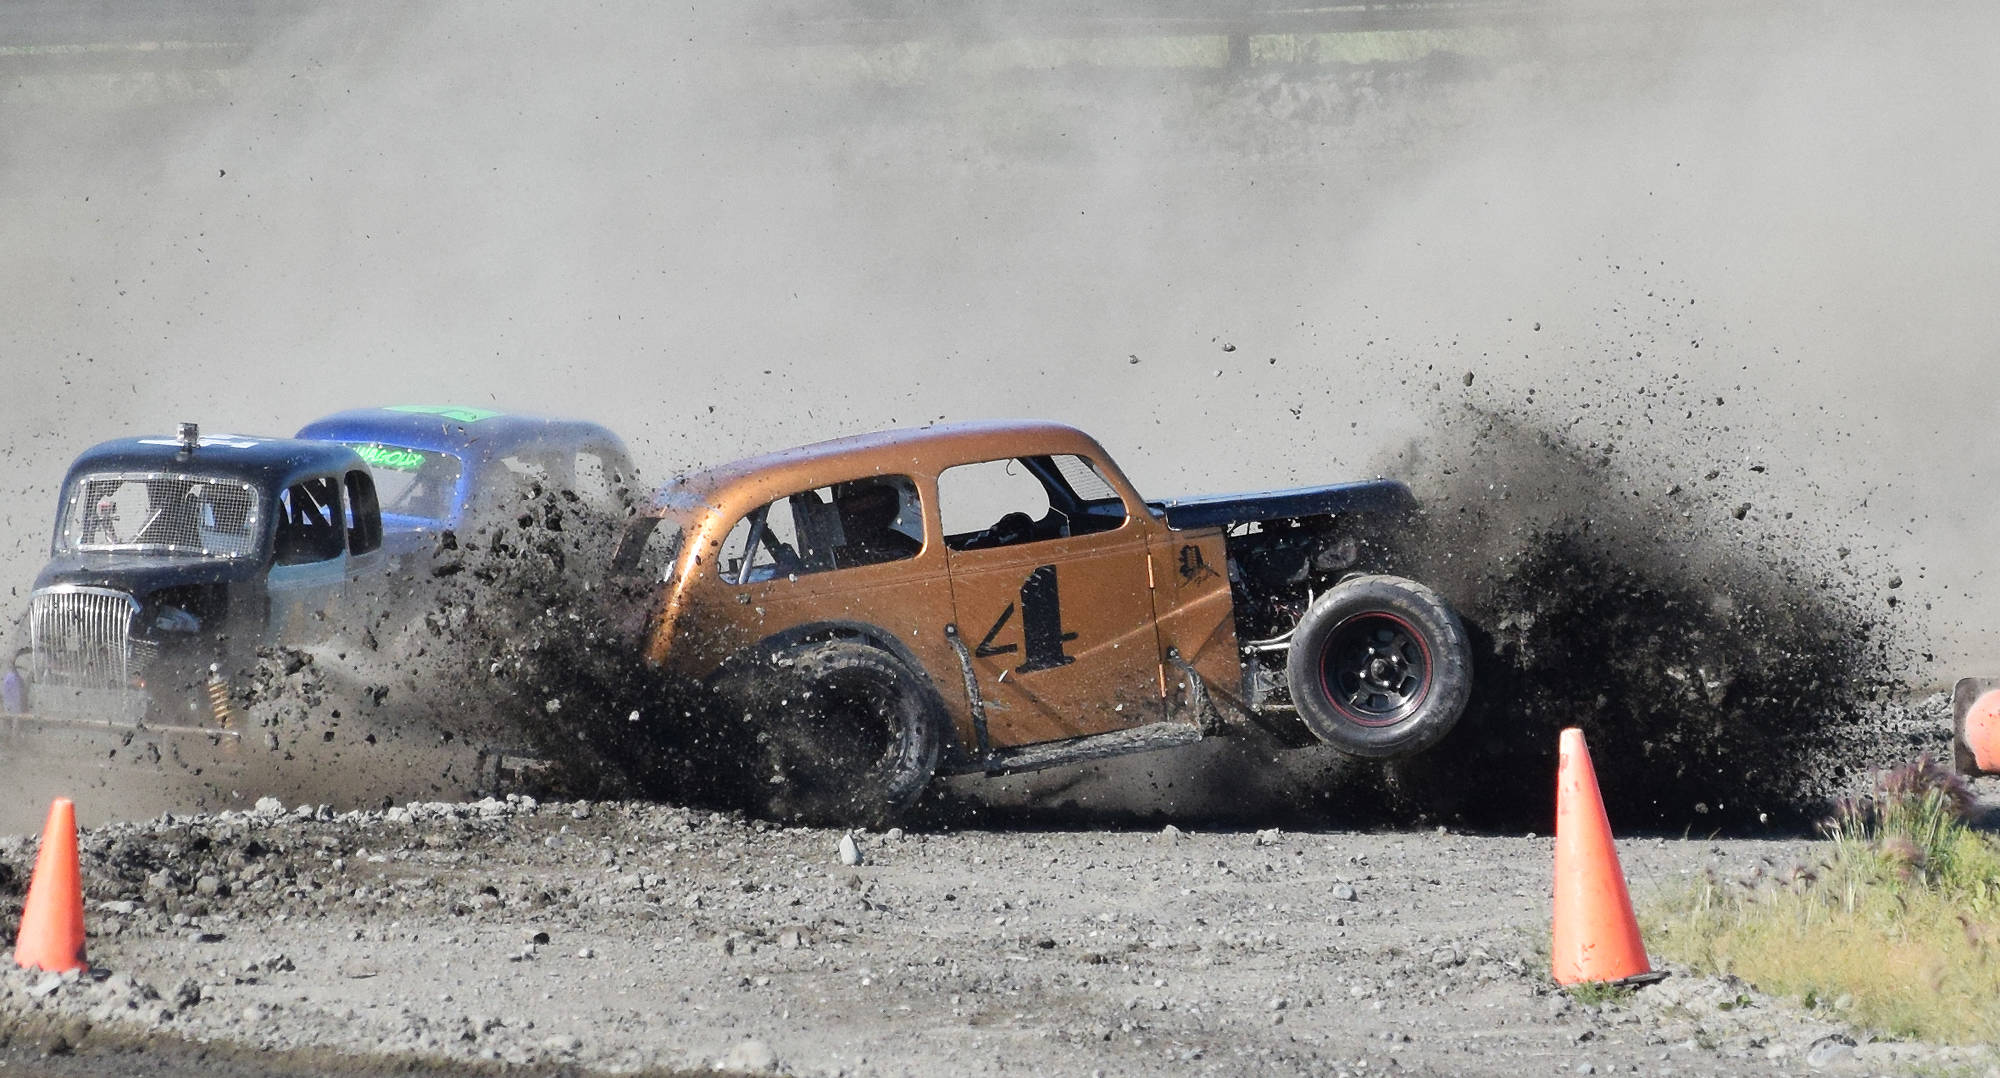 A Legends car racer spins out during the running of the Alaska Dirt Track Shootout held Saturday at Twin City Raceway in Kenai. (Photo by Joey Klecka/Peninsula Clarion)